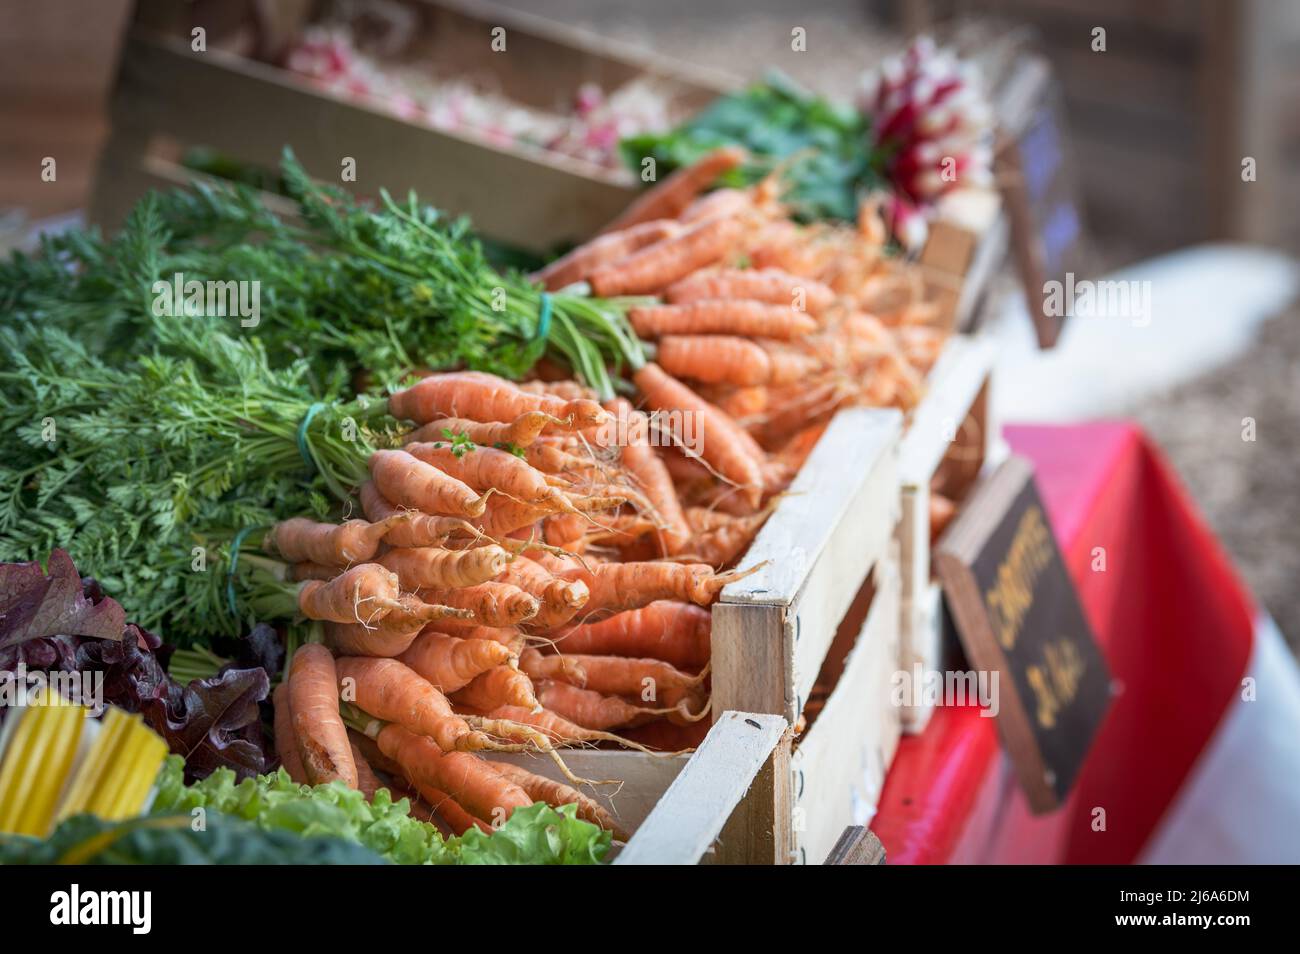 tasted and fresh carots vegetables on a market Stock Photo